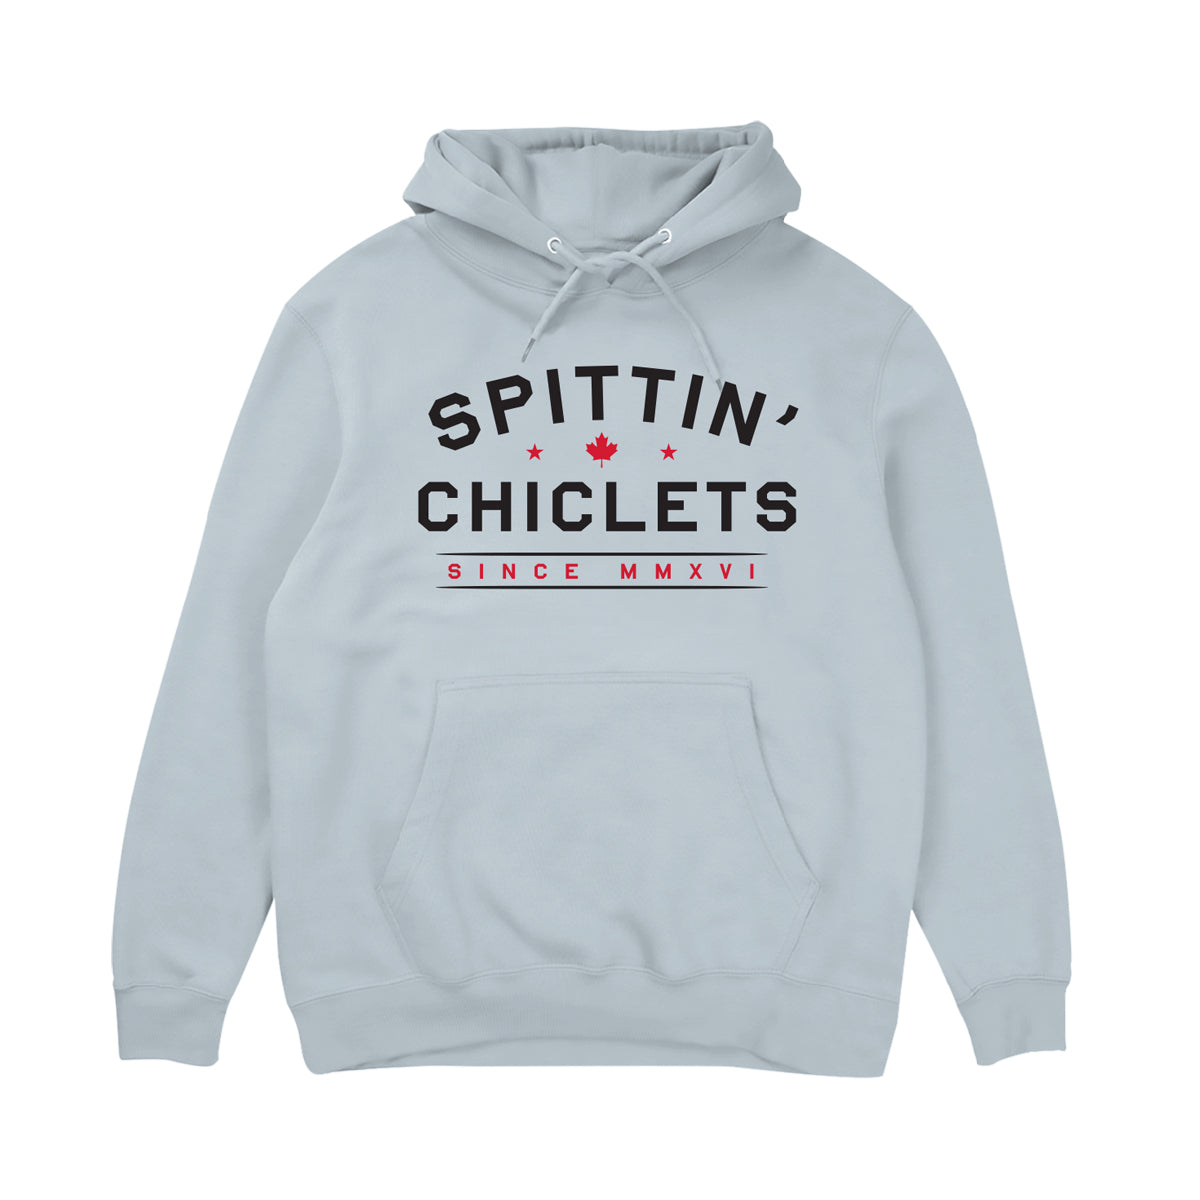 Spittin Chiclets Since MMXVI Hoodie